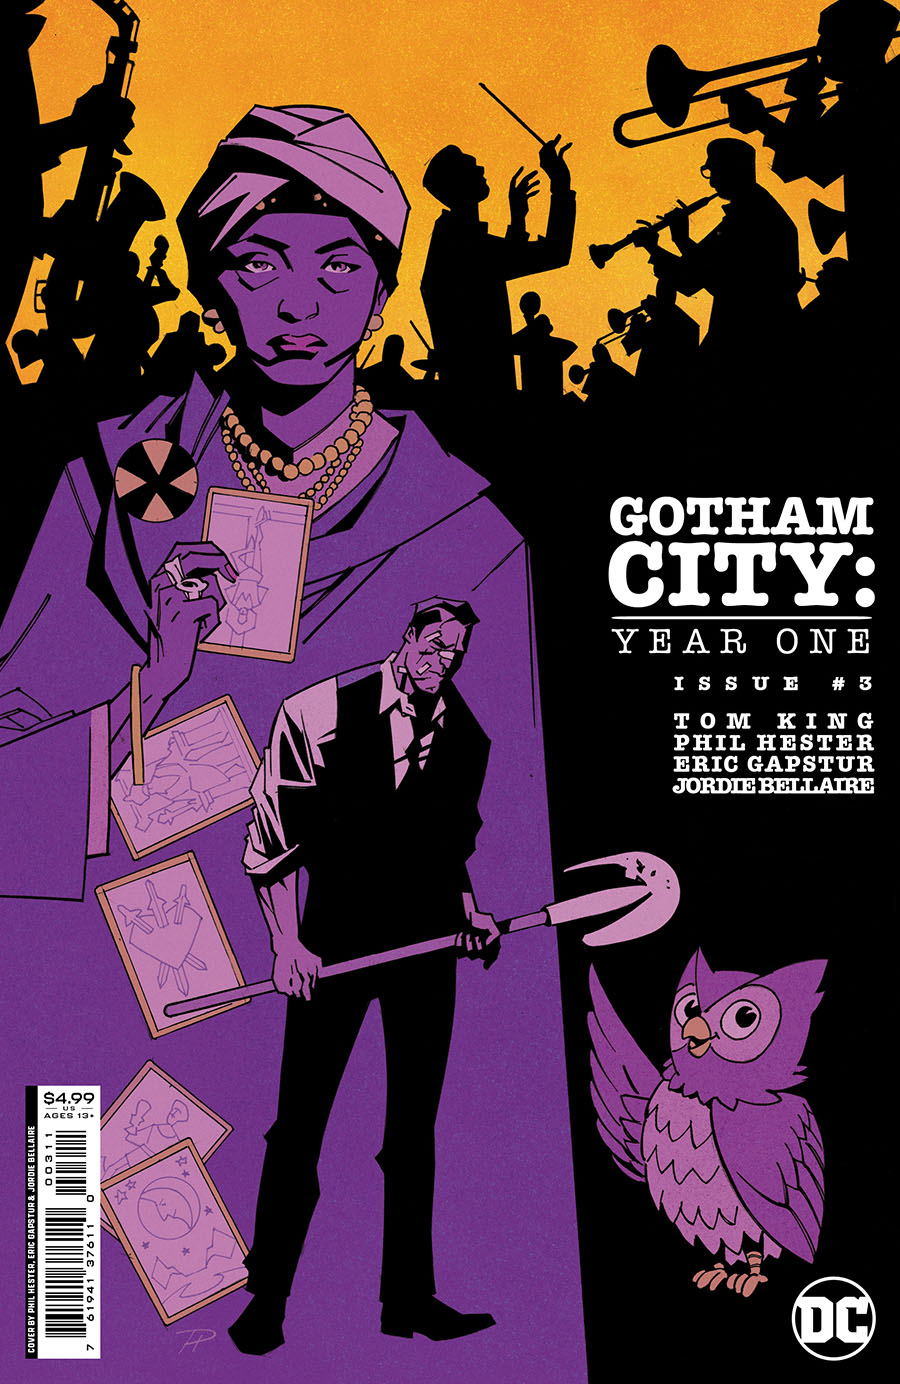 Gotham City Year One #3 Cover A Regular Phil Hester & Eric Gapstur Cover